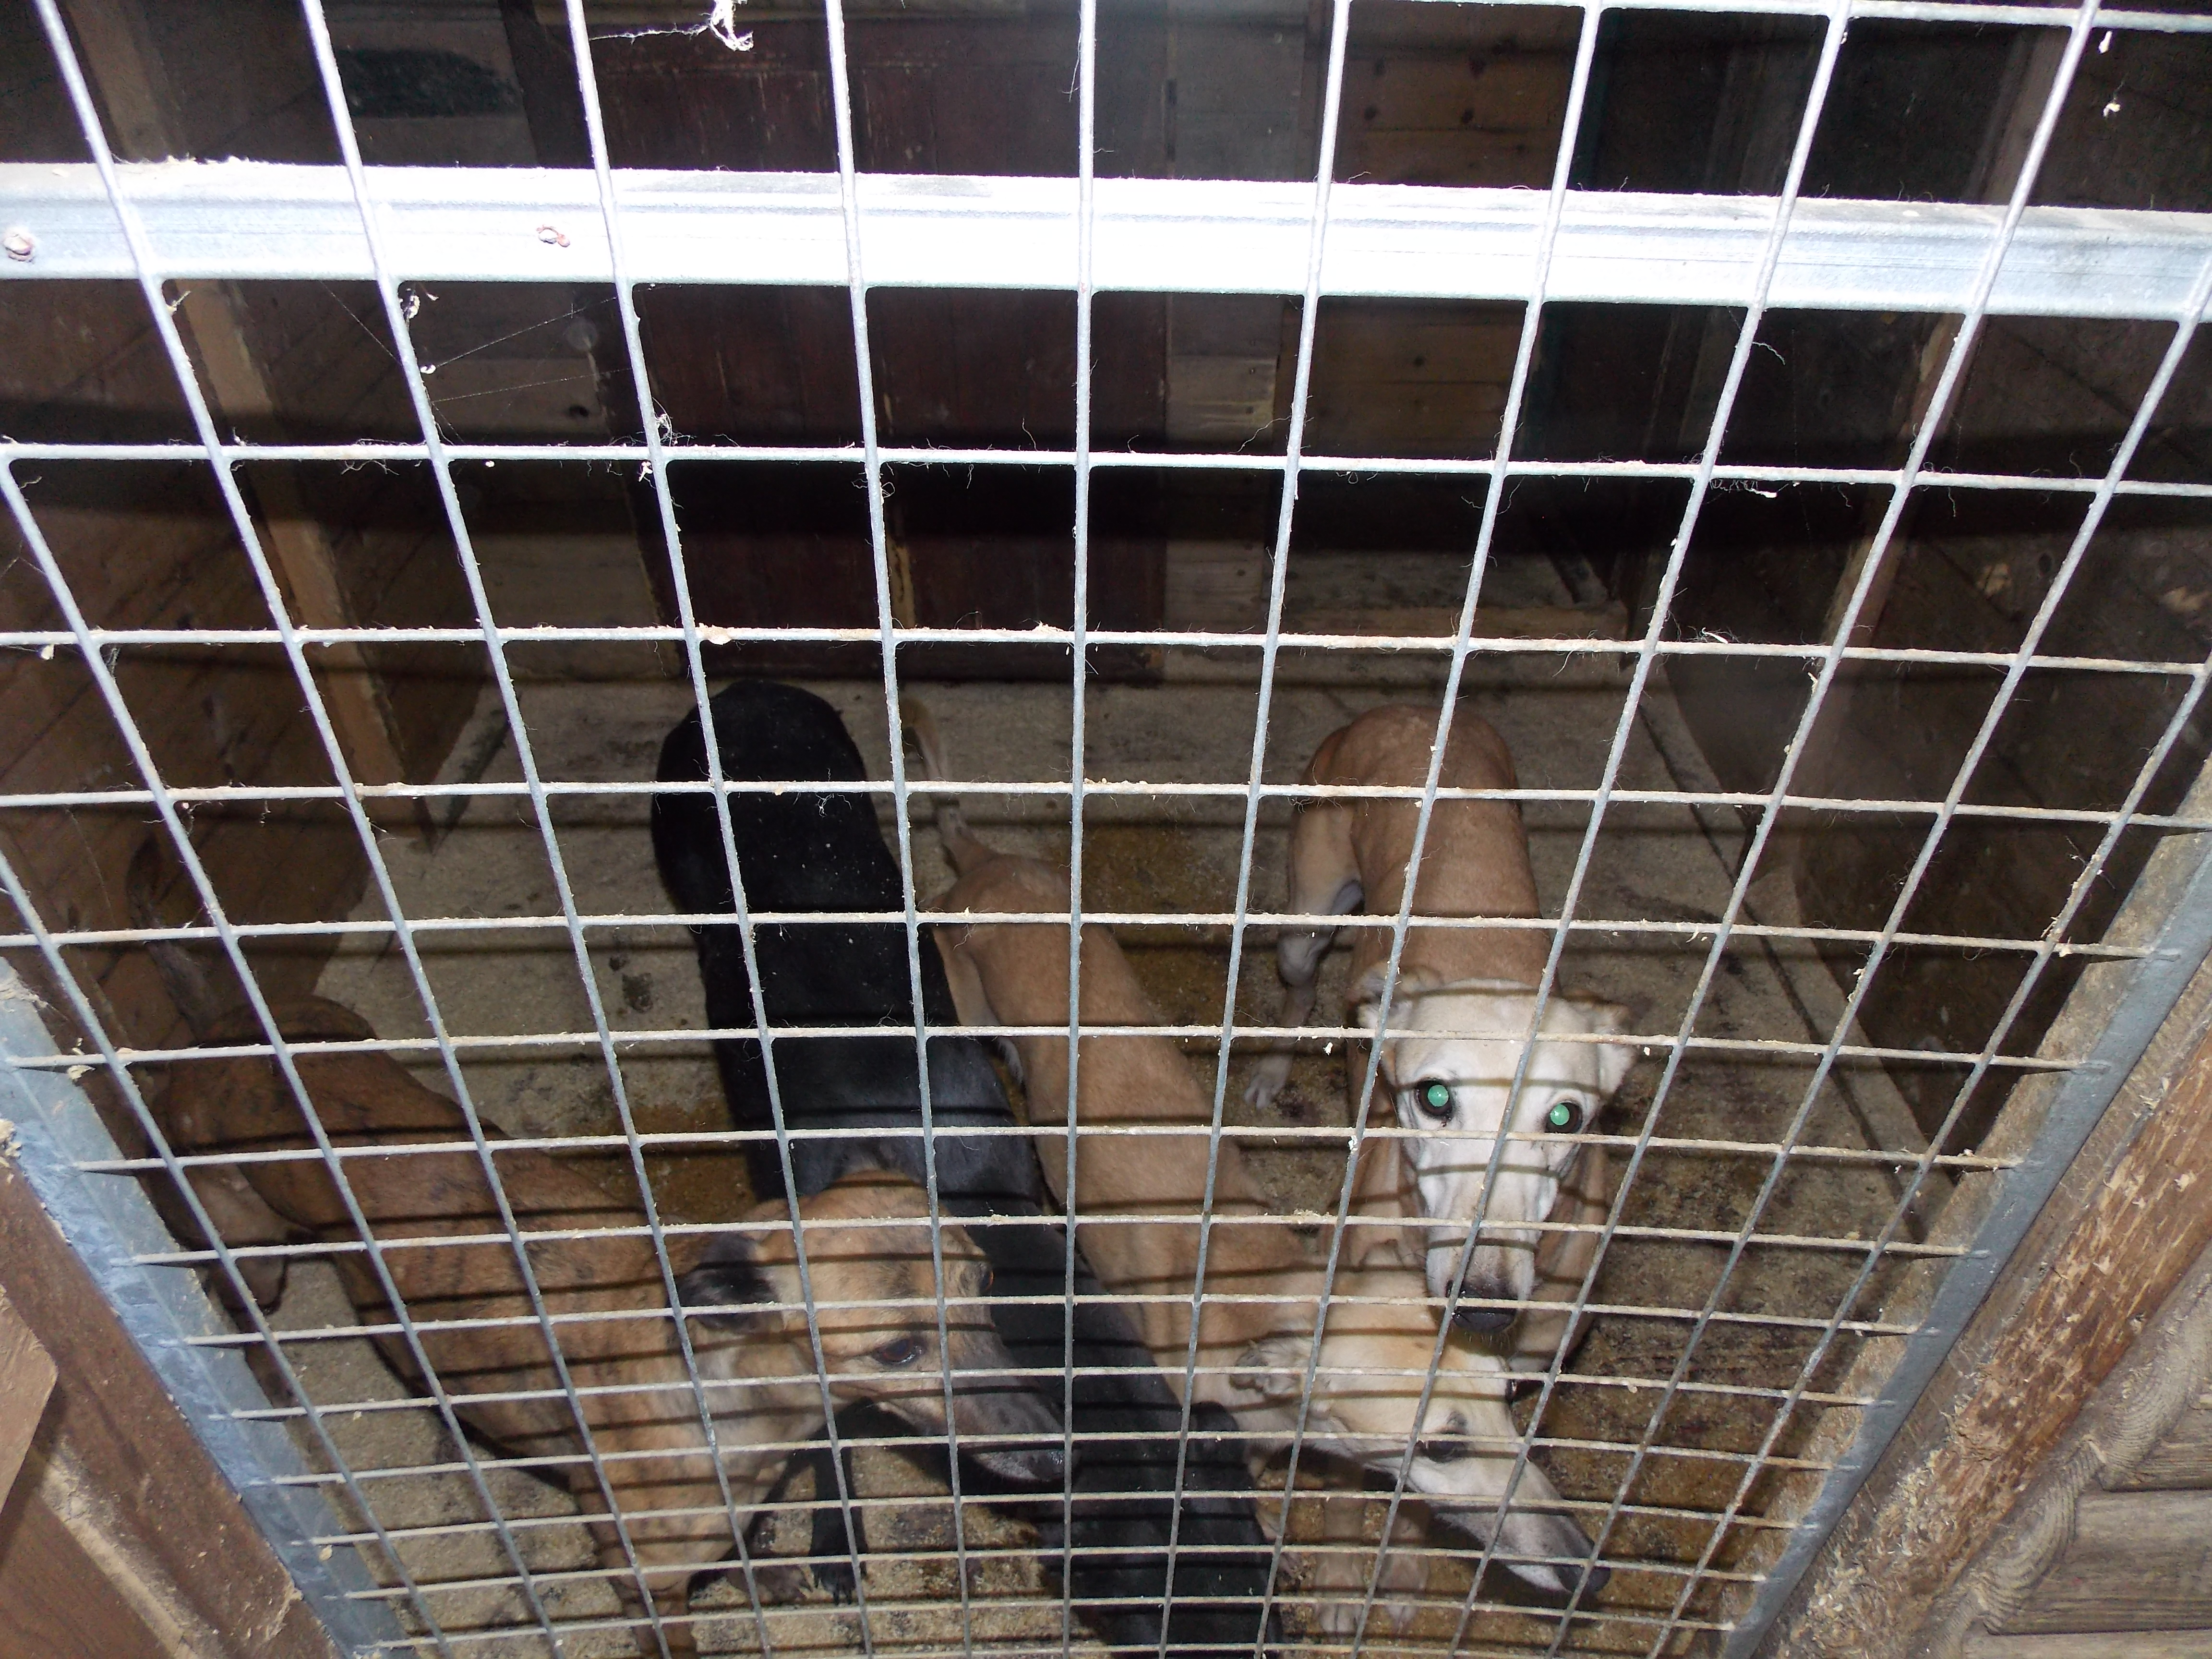 A Gwaun Cae Gurwen man has been banned from keeping all animals for three years after causing unnecessary suffering to five dogs and for keeping dogs in a poor environment.